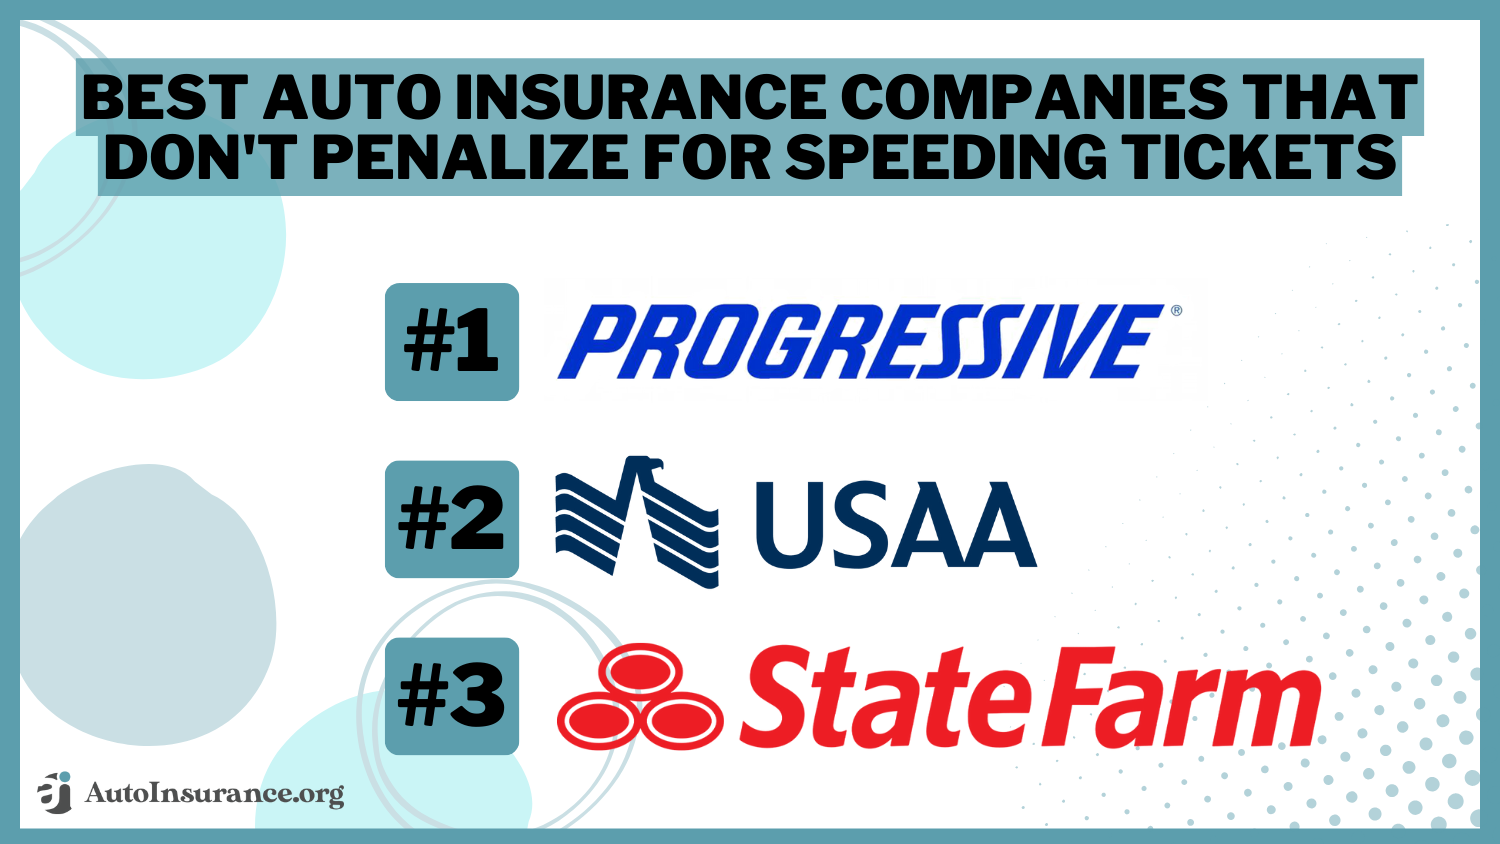 Progressive, USAA, State Farm: Best Auto Insurance Companies That Don't Penalize for Speeding Tickets